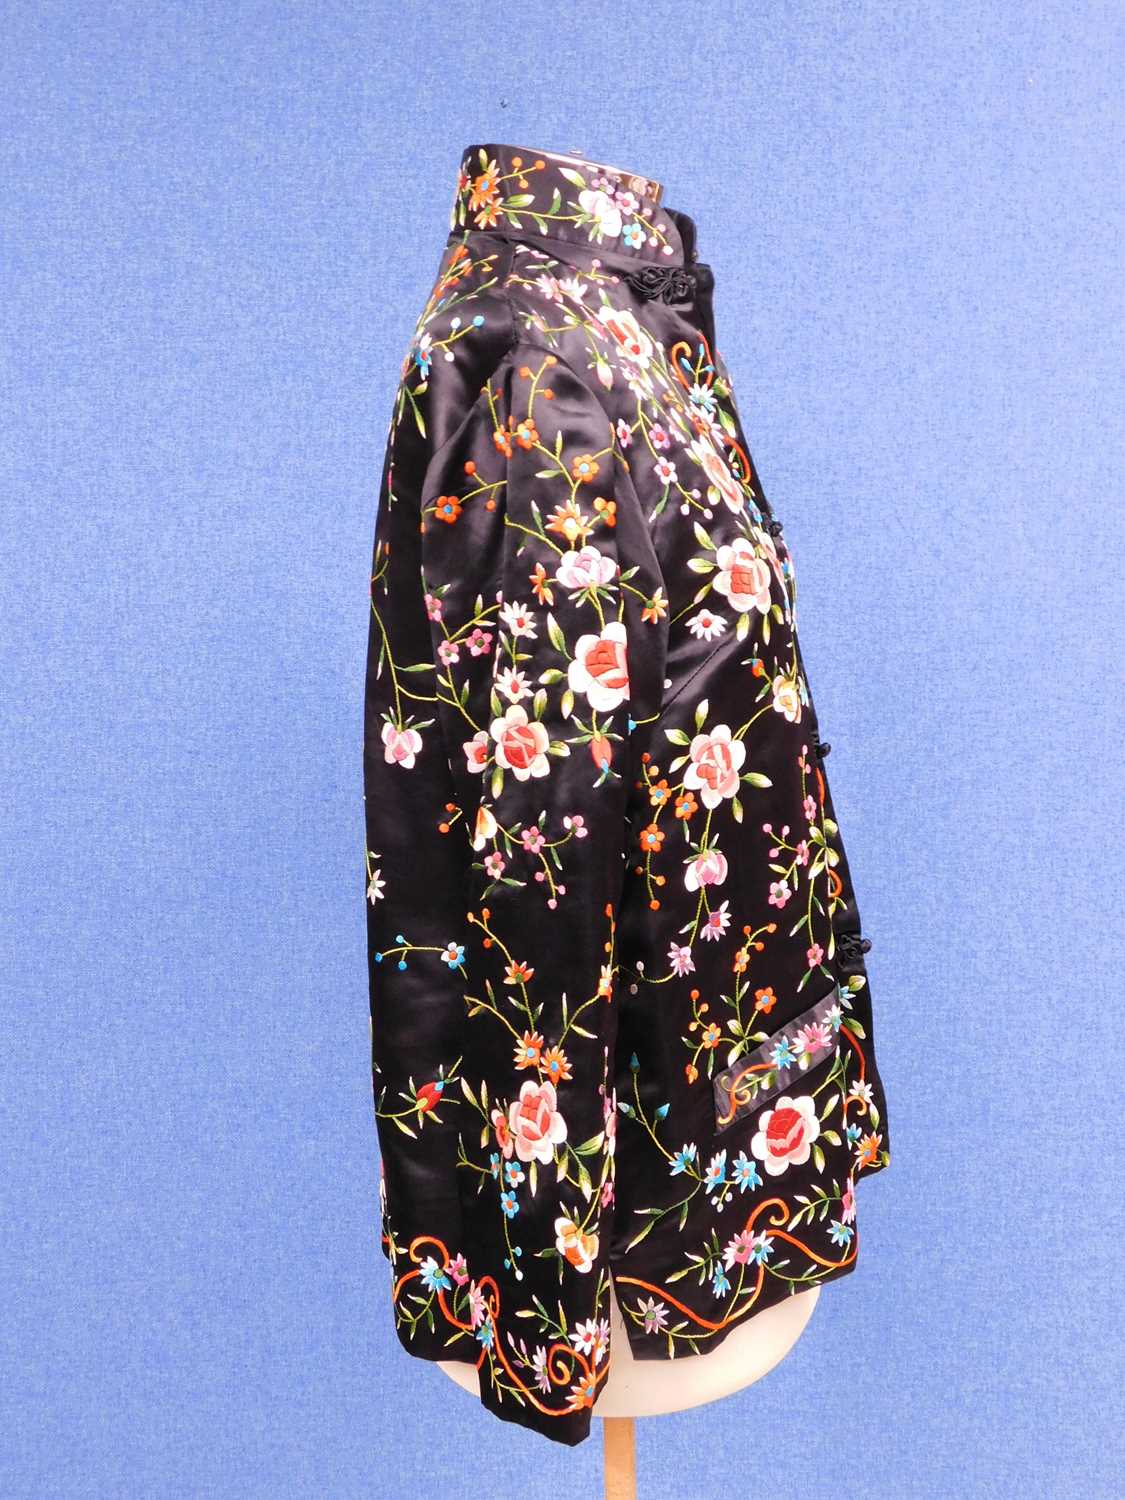 A black satin and muli-coloured embroidery Chinese jacket by Plum Blossom, with high neck, long - Bild 2 aus 5